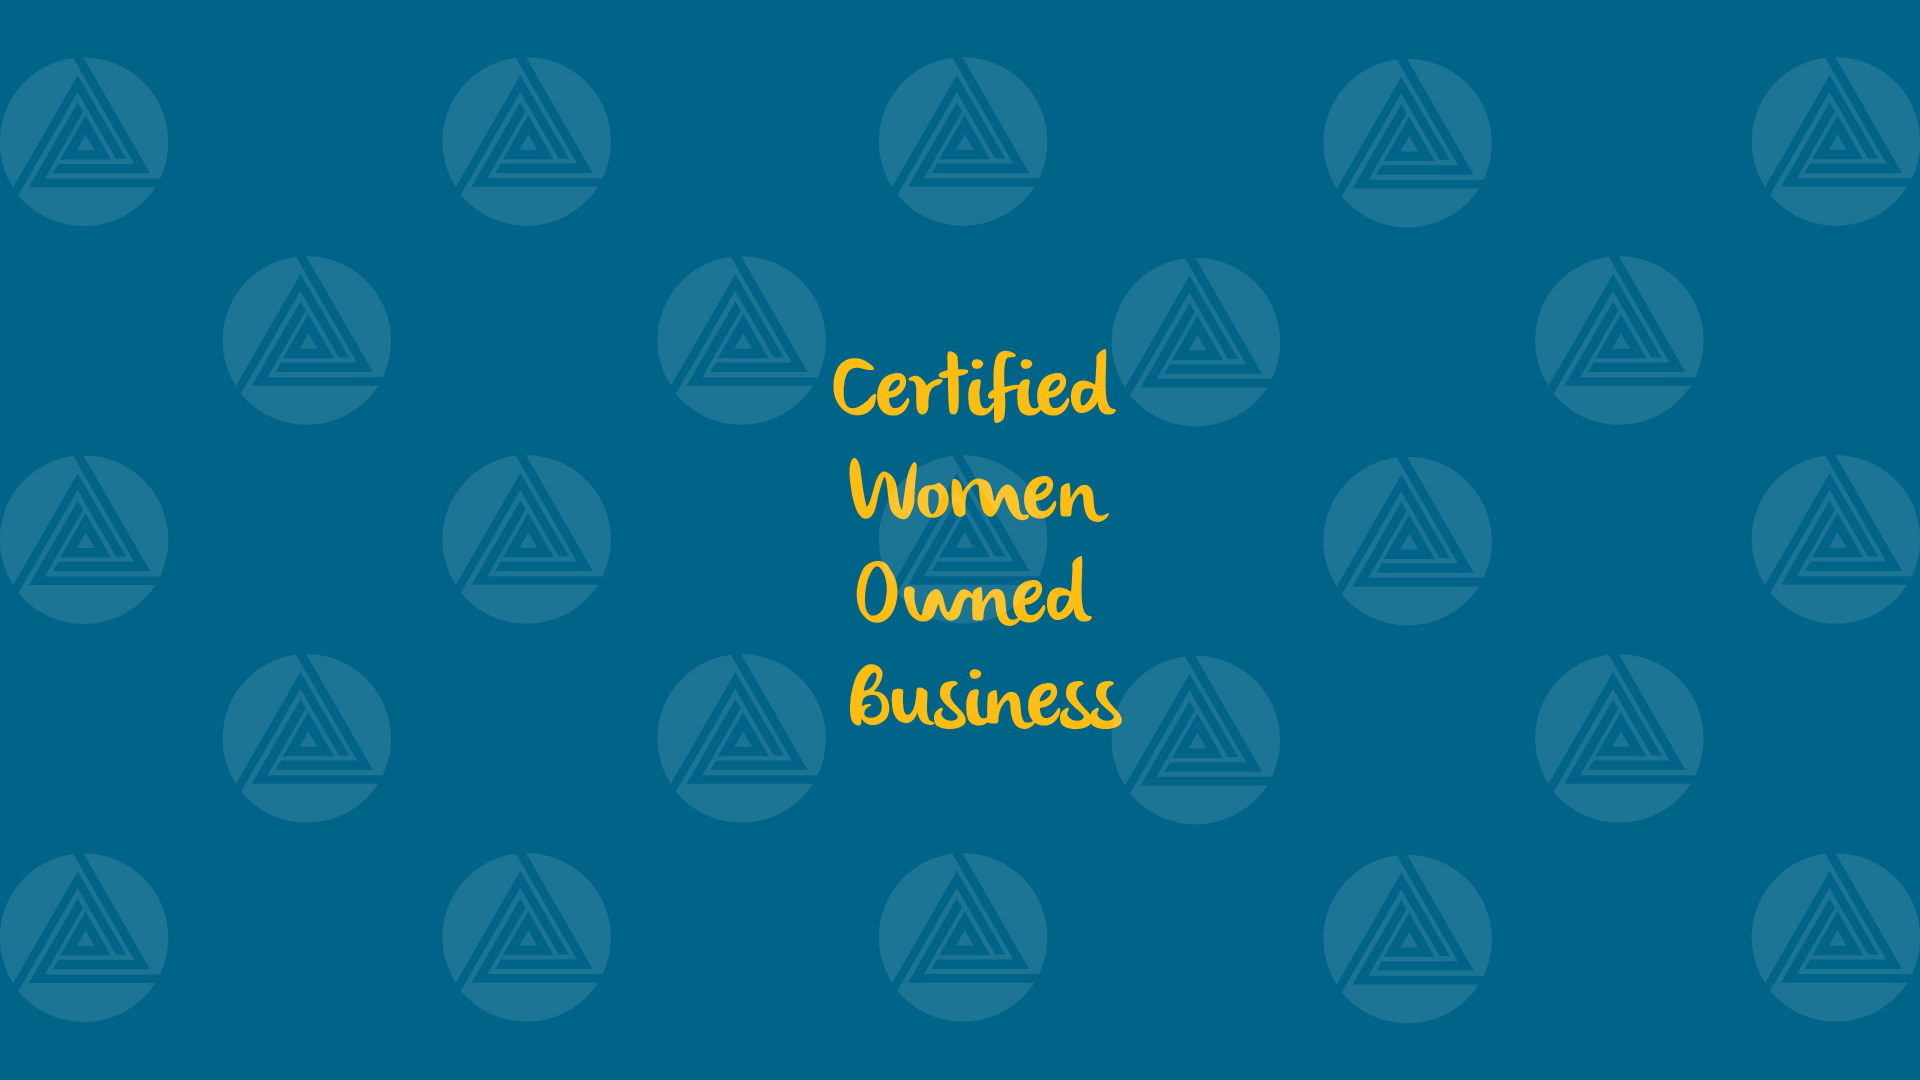 Growth Acceleration Partners Awarded Woman-Owned Business Certification from WBENC